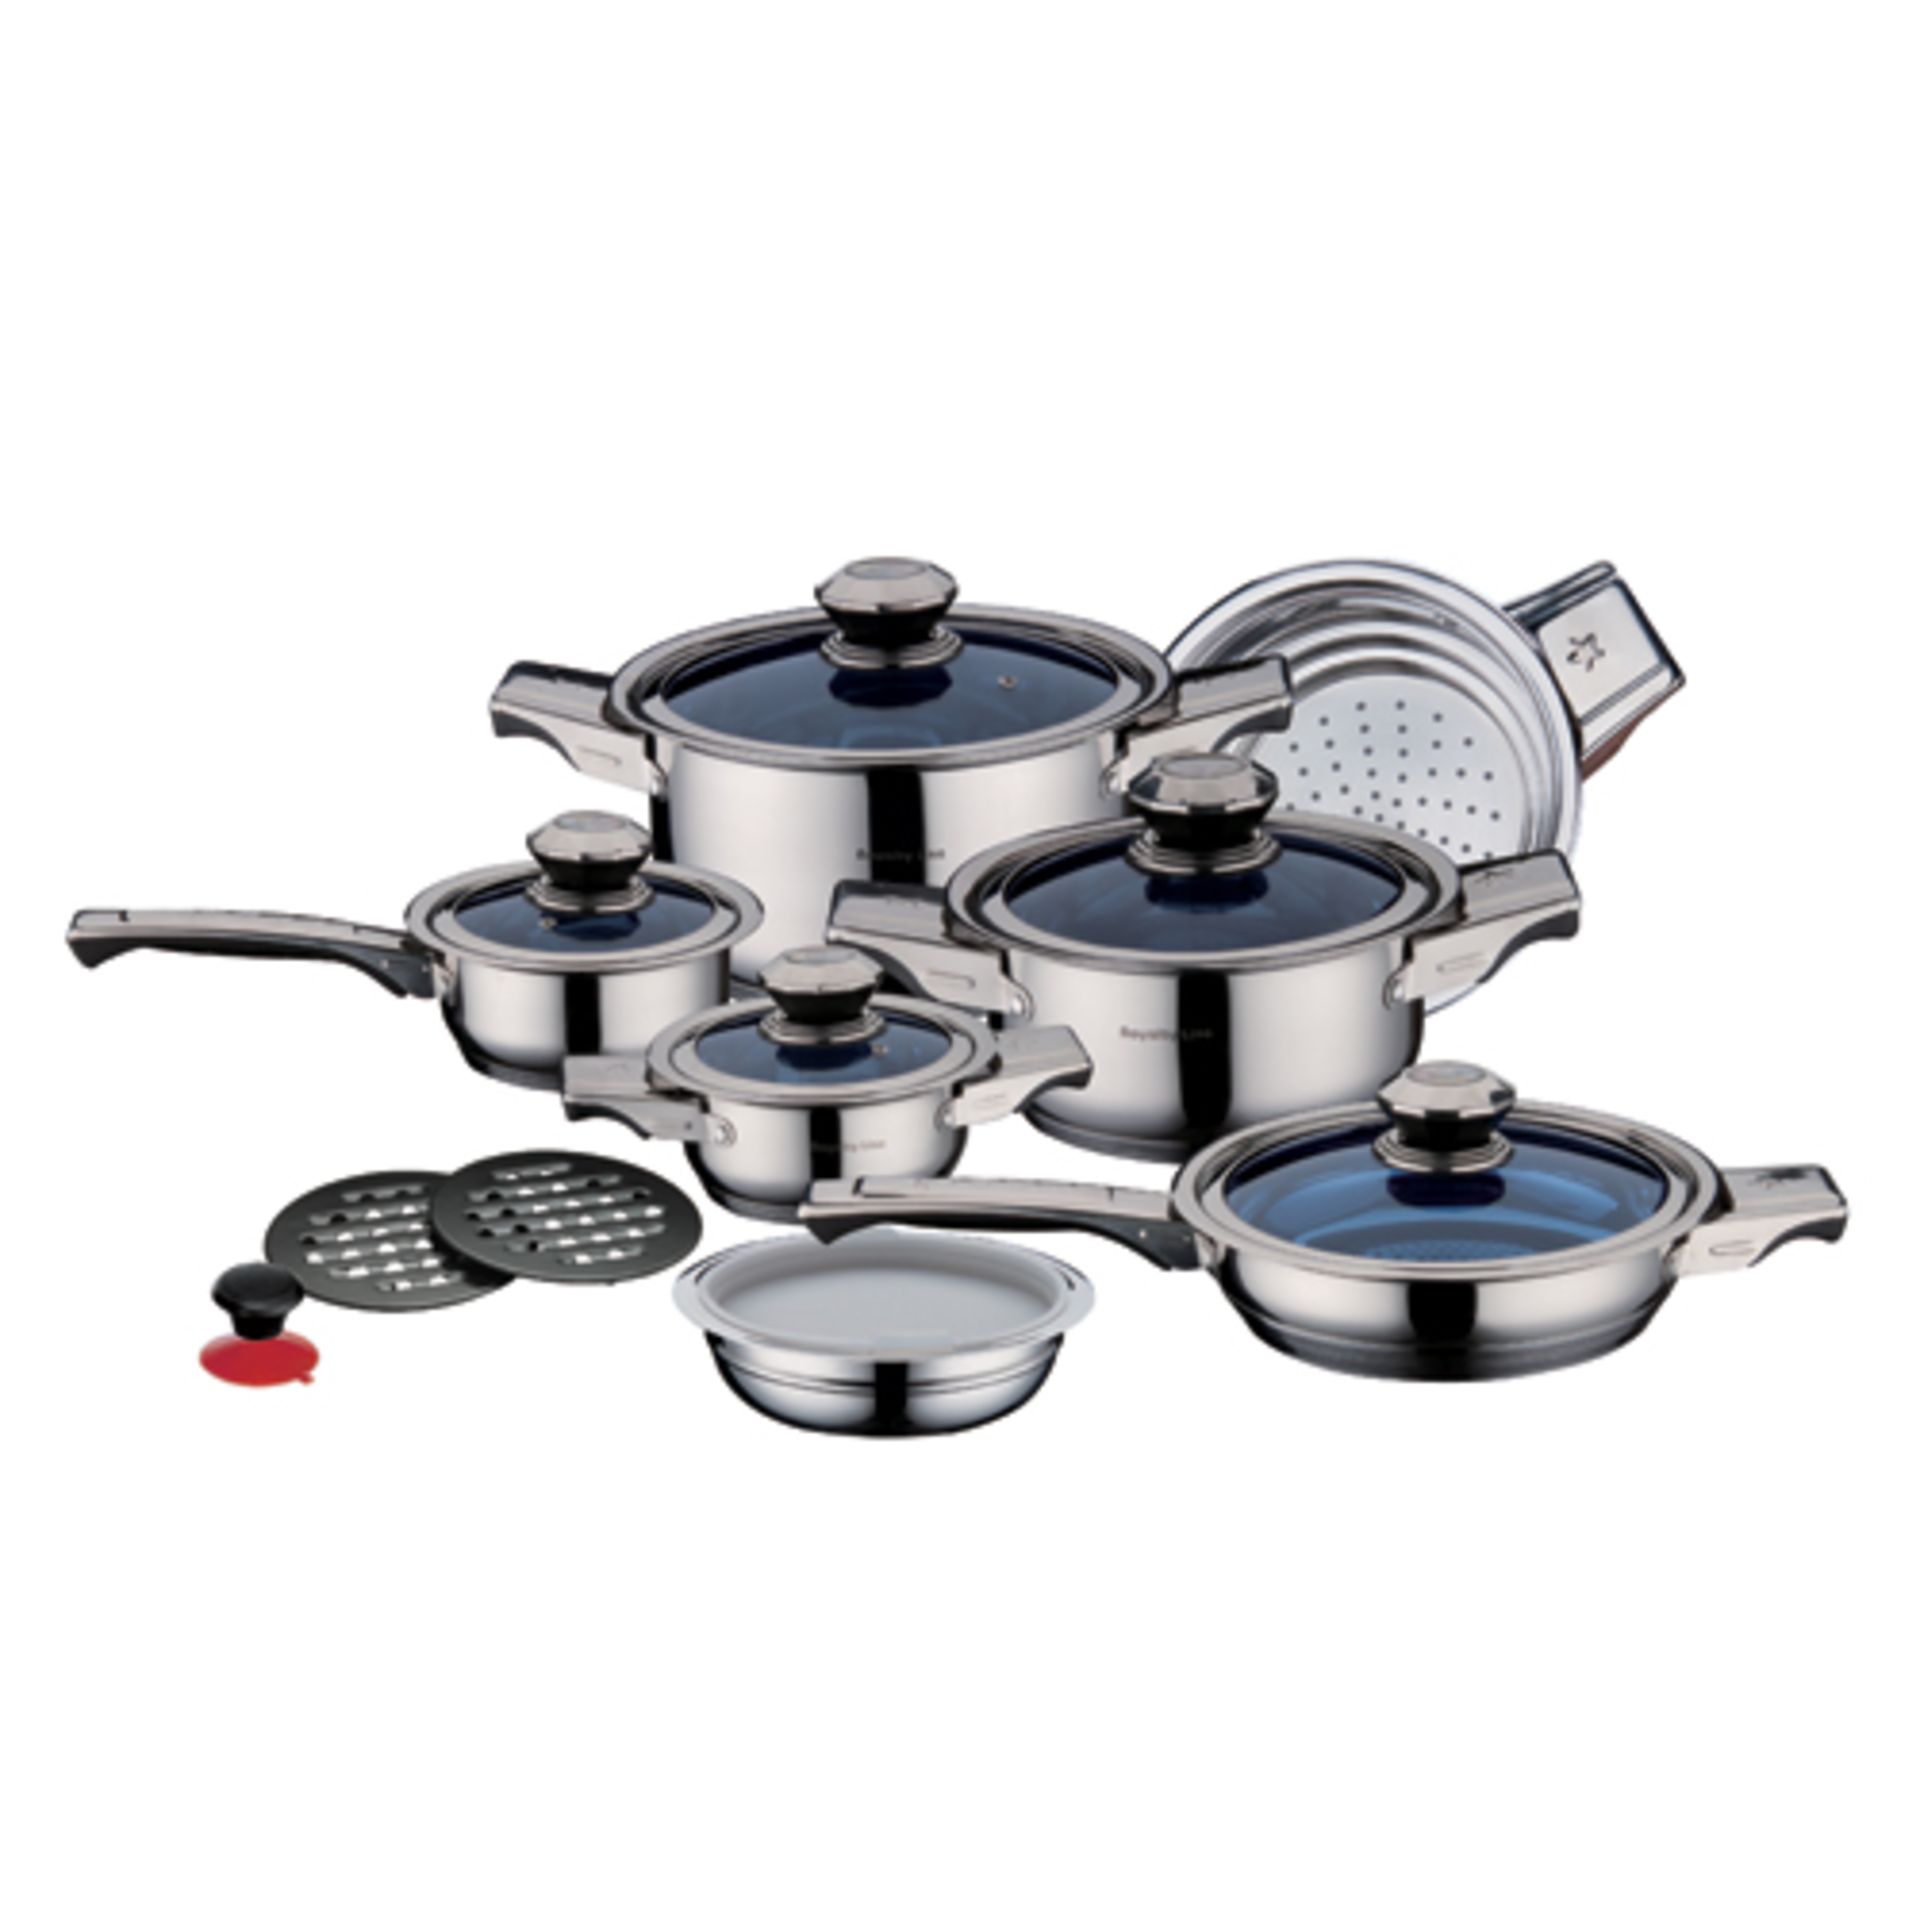 V 16pc Precision Royalty Line Switzerland Stainless Steel Cooking Set With Glass Lids RRP 1650.00 - Image 2 of 2